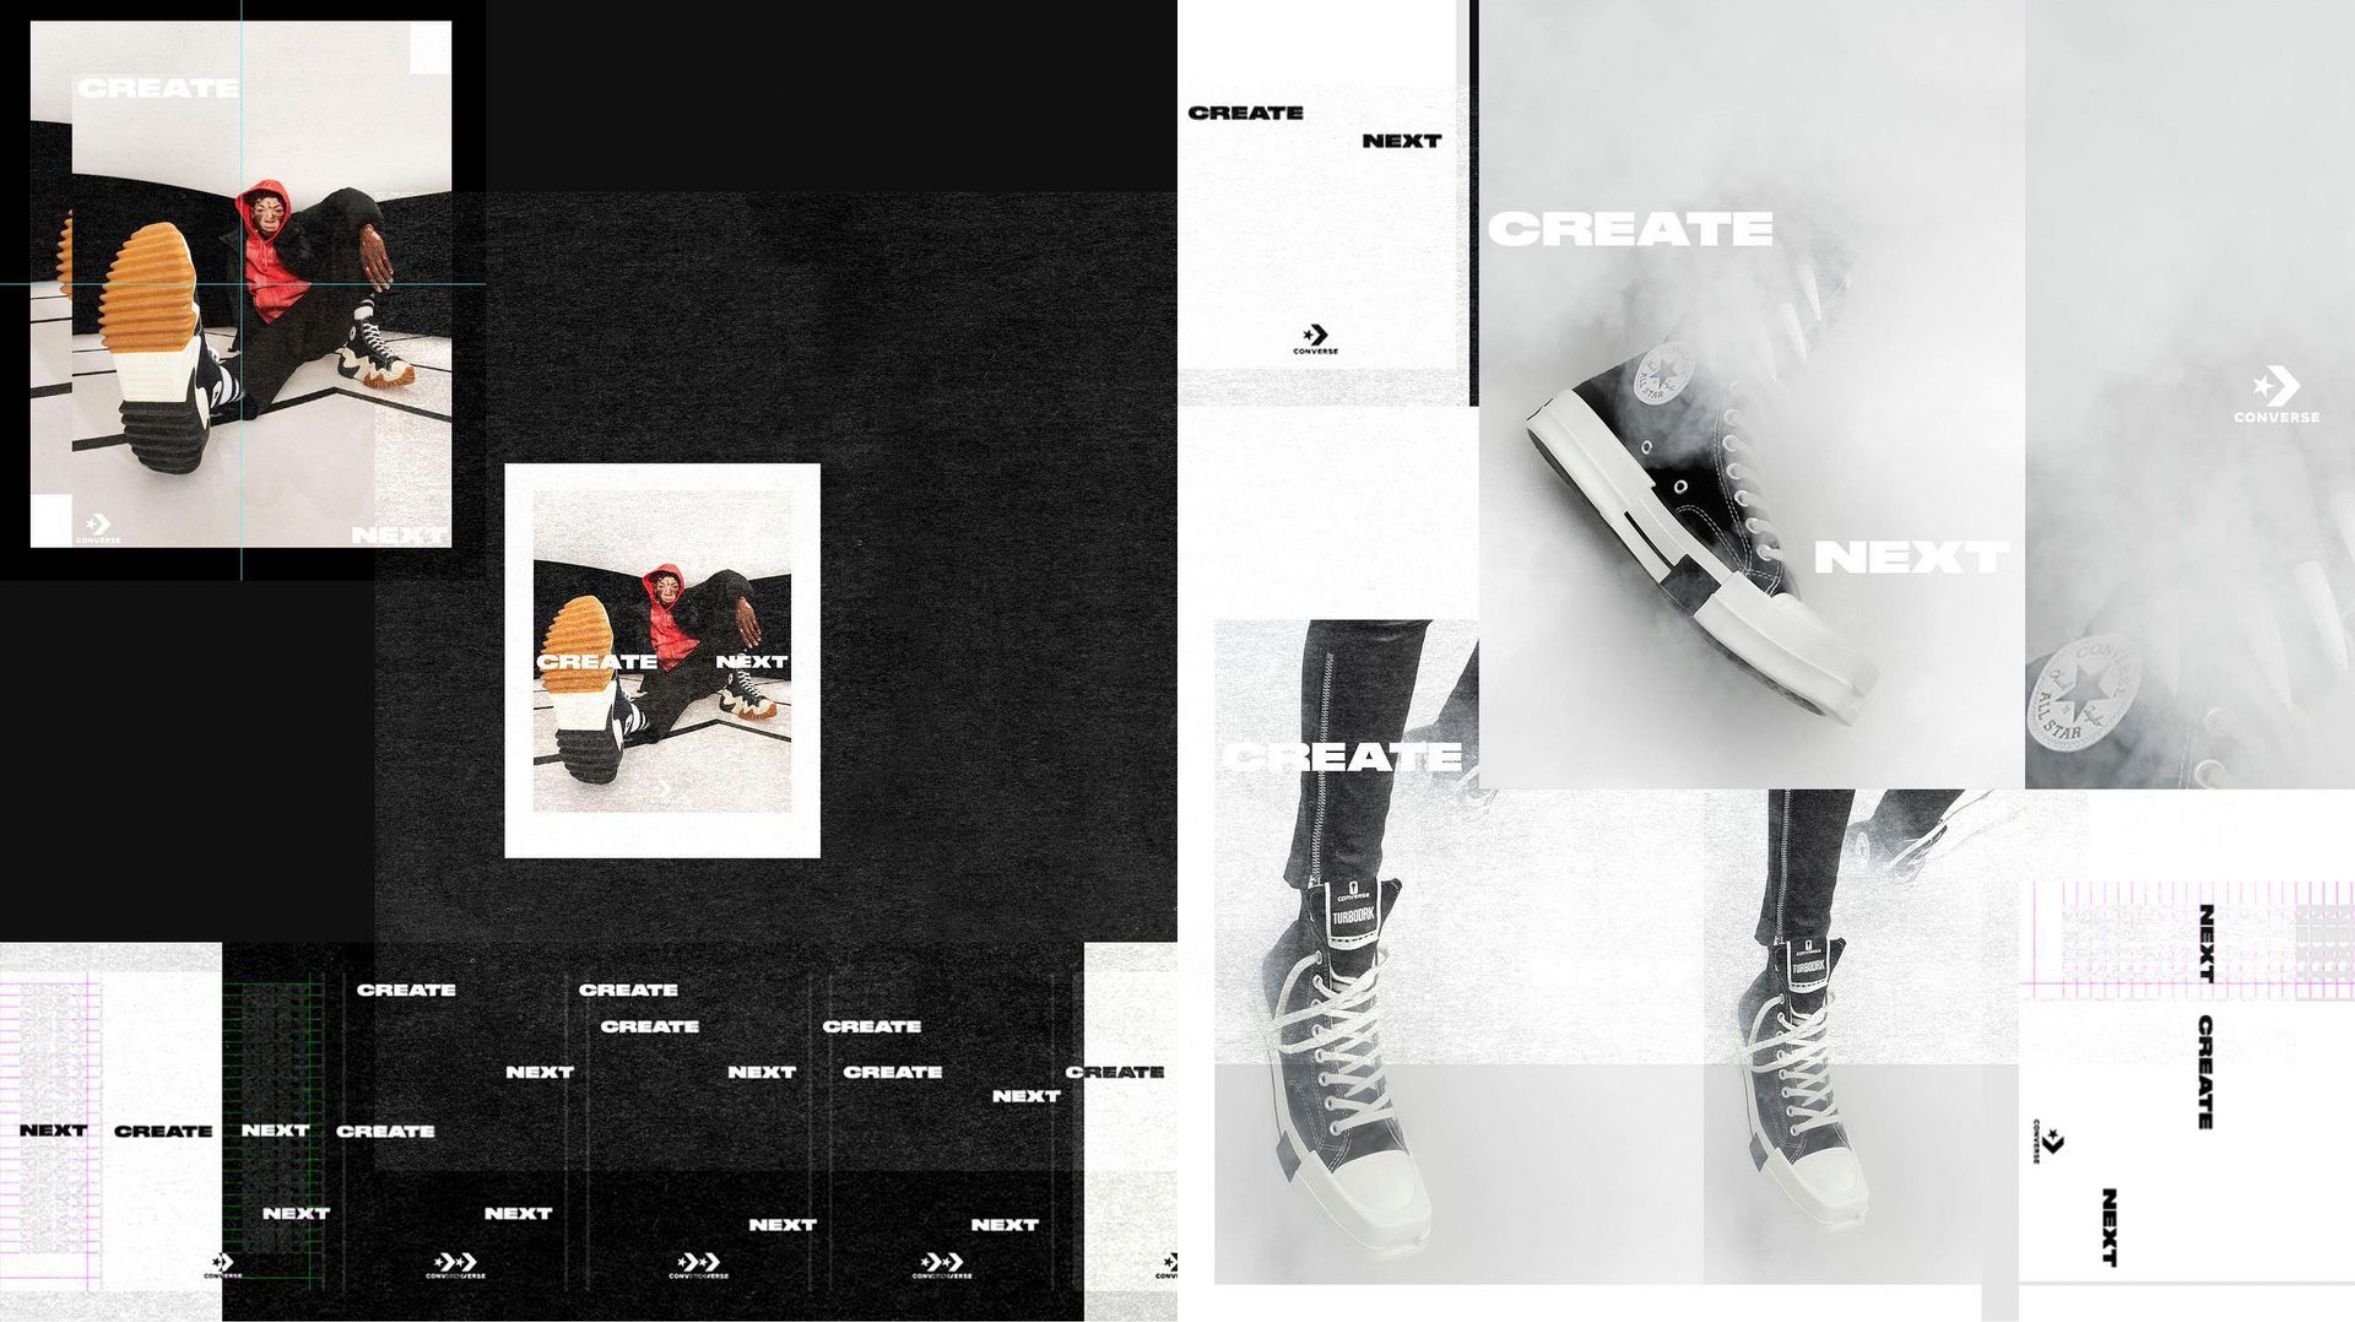 Collage of Man sitting on floor with sole of Converse All Star shoe toward camera, A black canvas Converse all Star shoe untied behind smoke and the words Create Next repeated